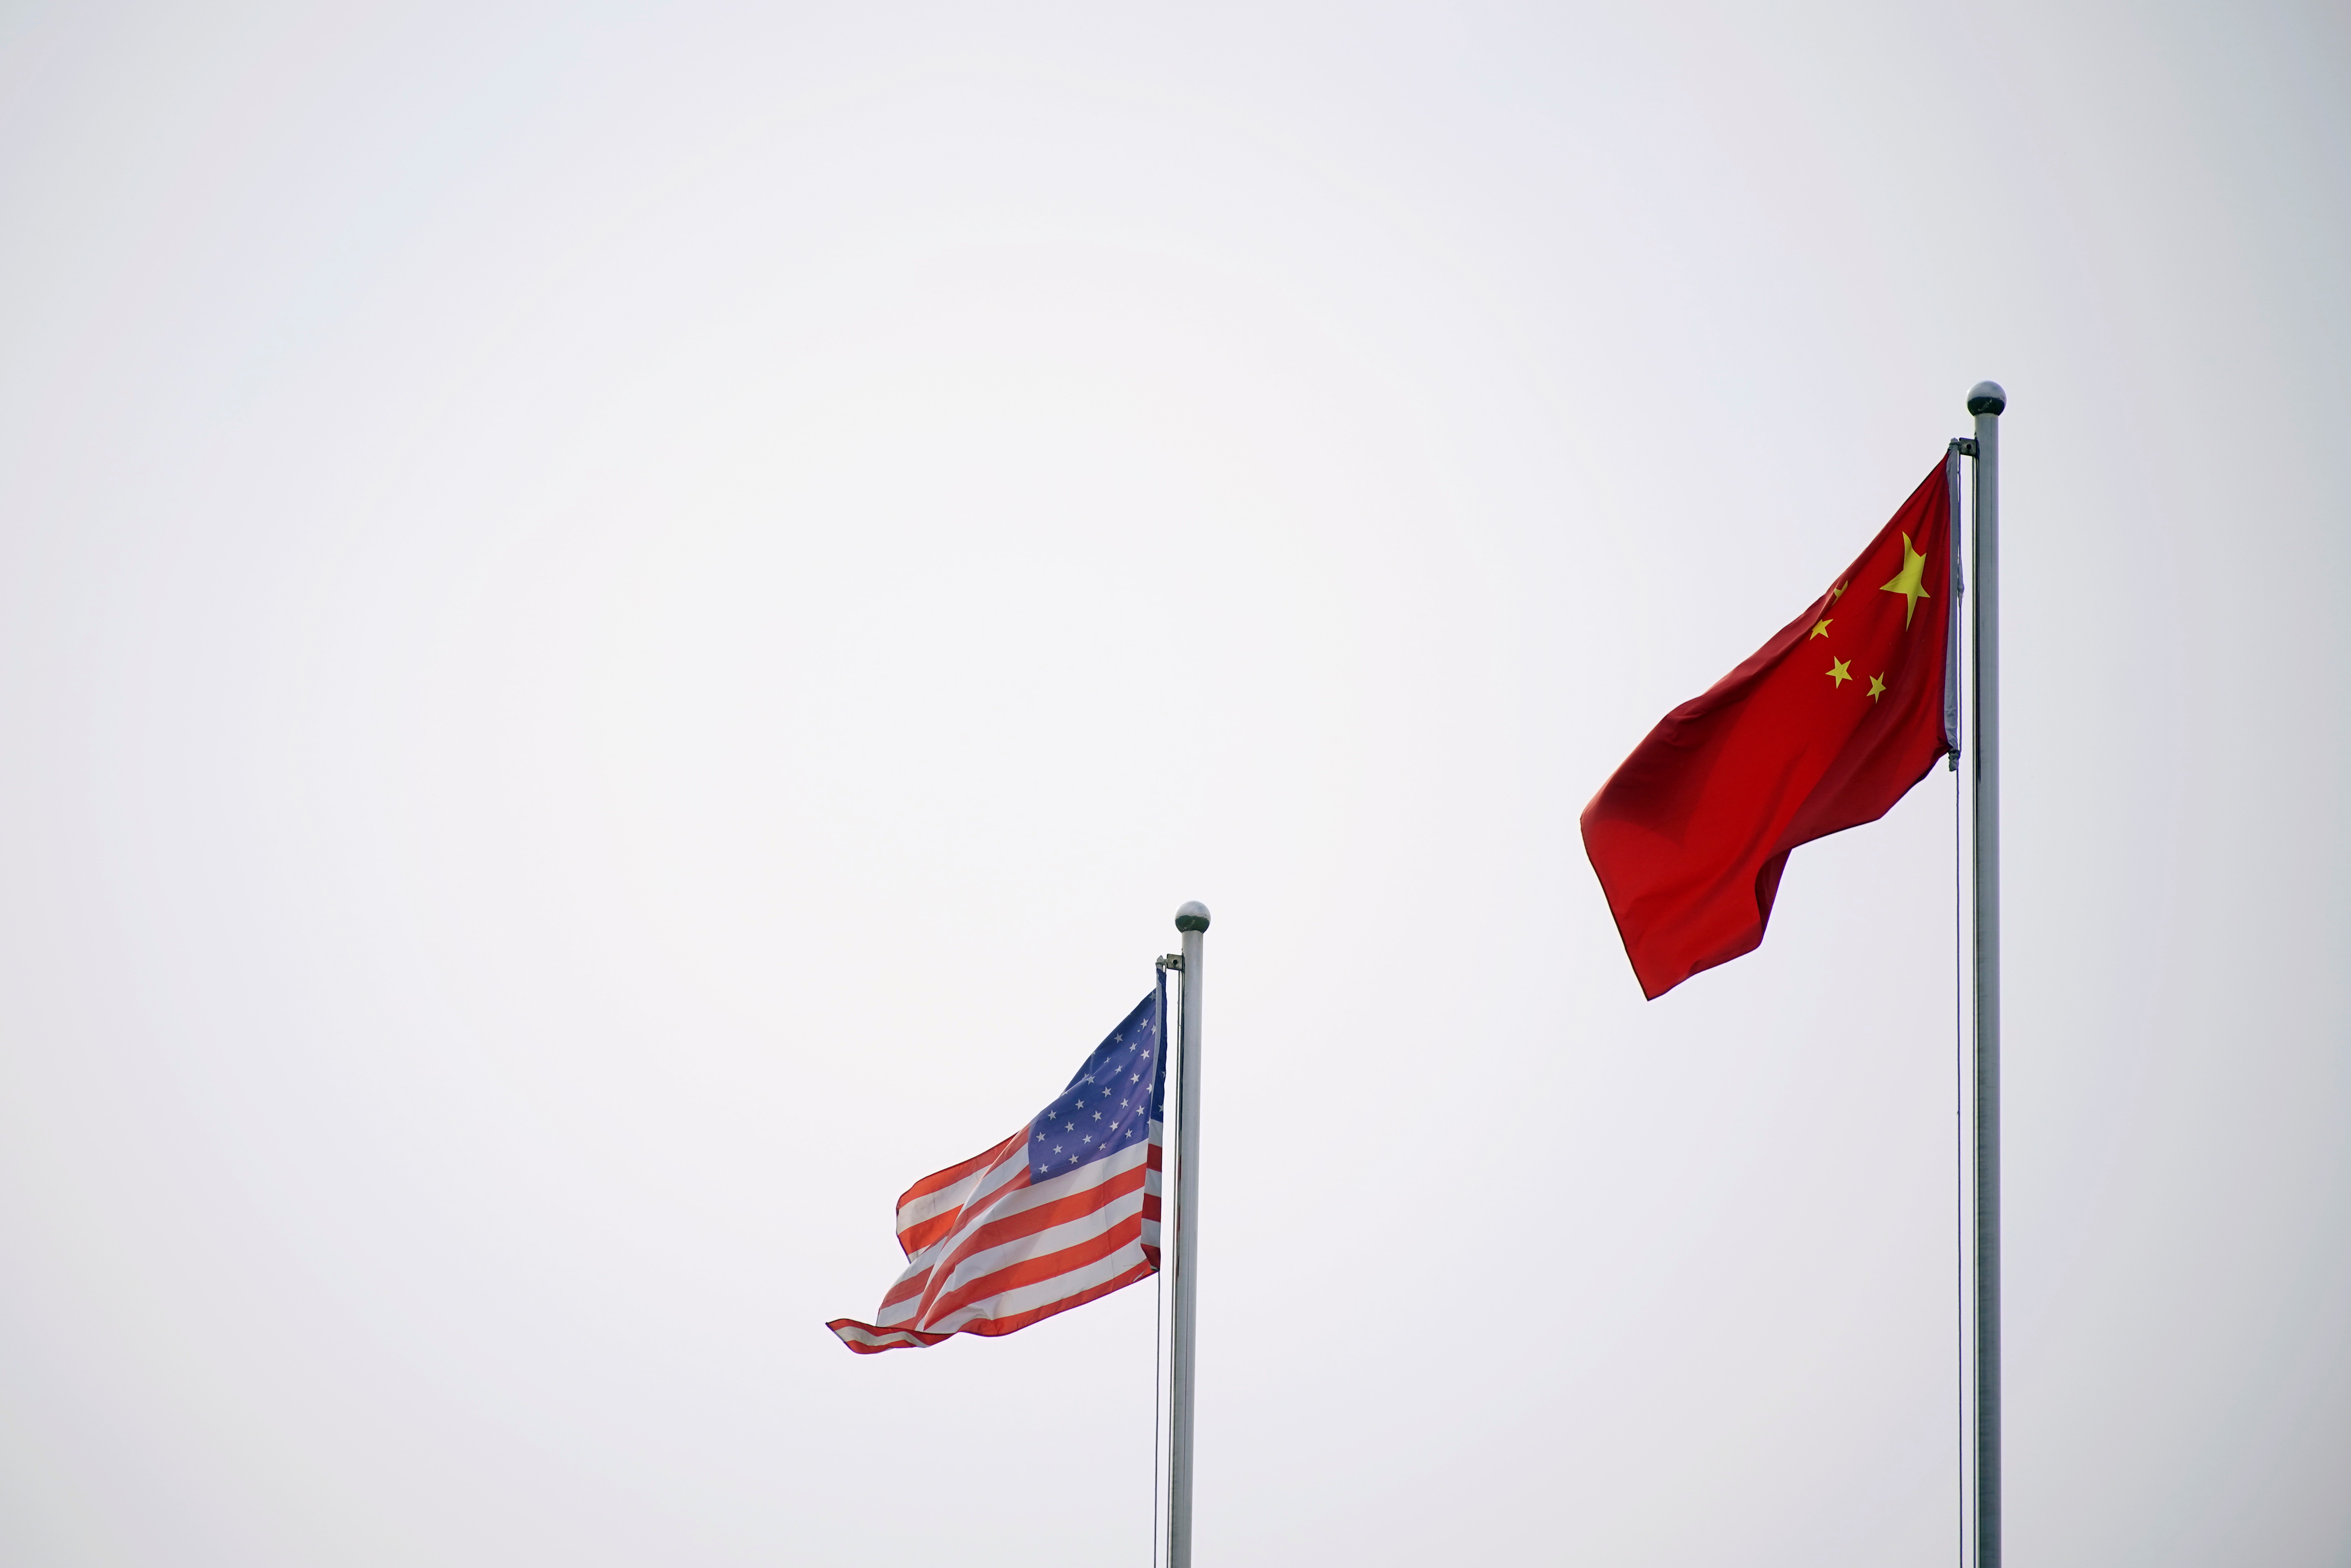 Chinese and U.S. flags flutter outside a company building in Shanghai, China April 14, 2021. REUTERS/Aly Song